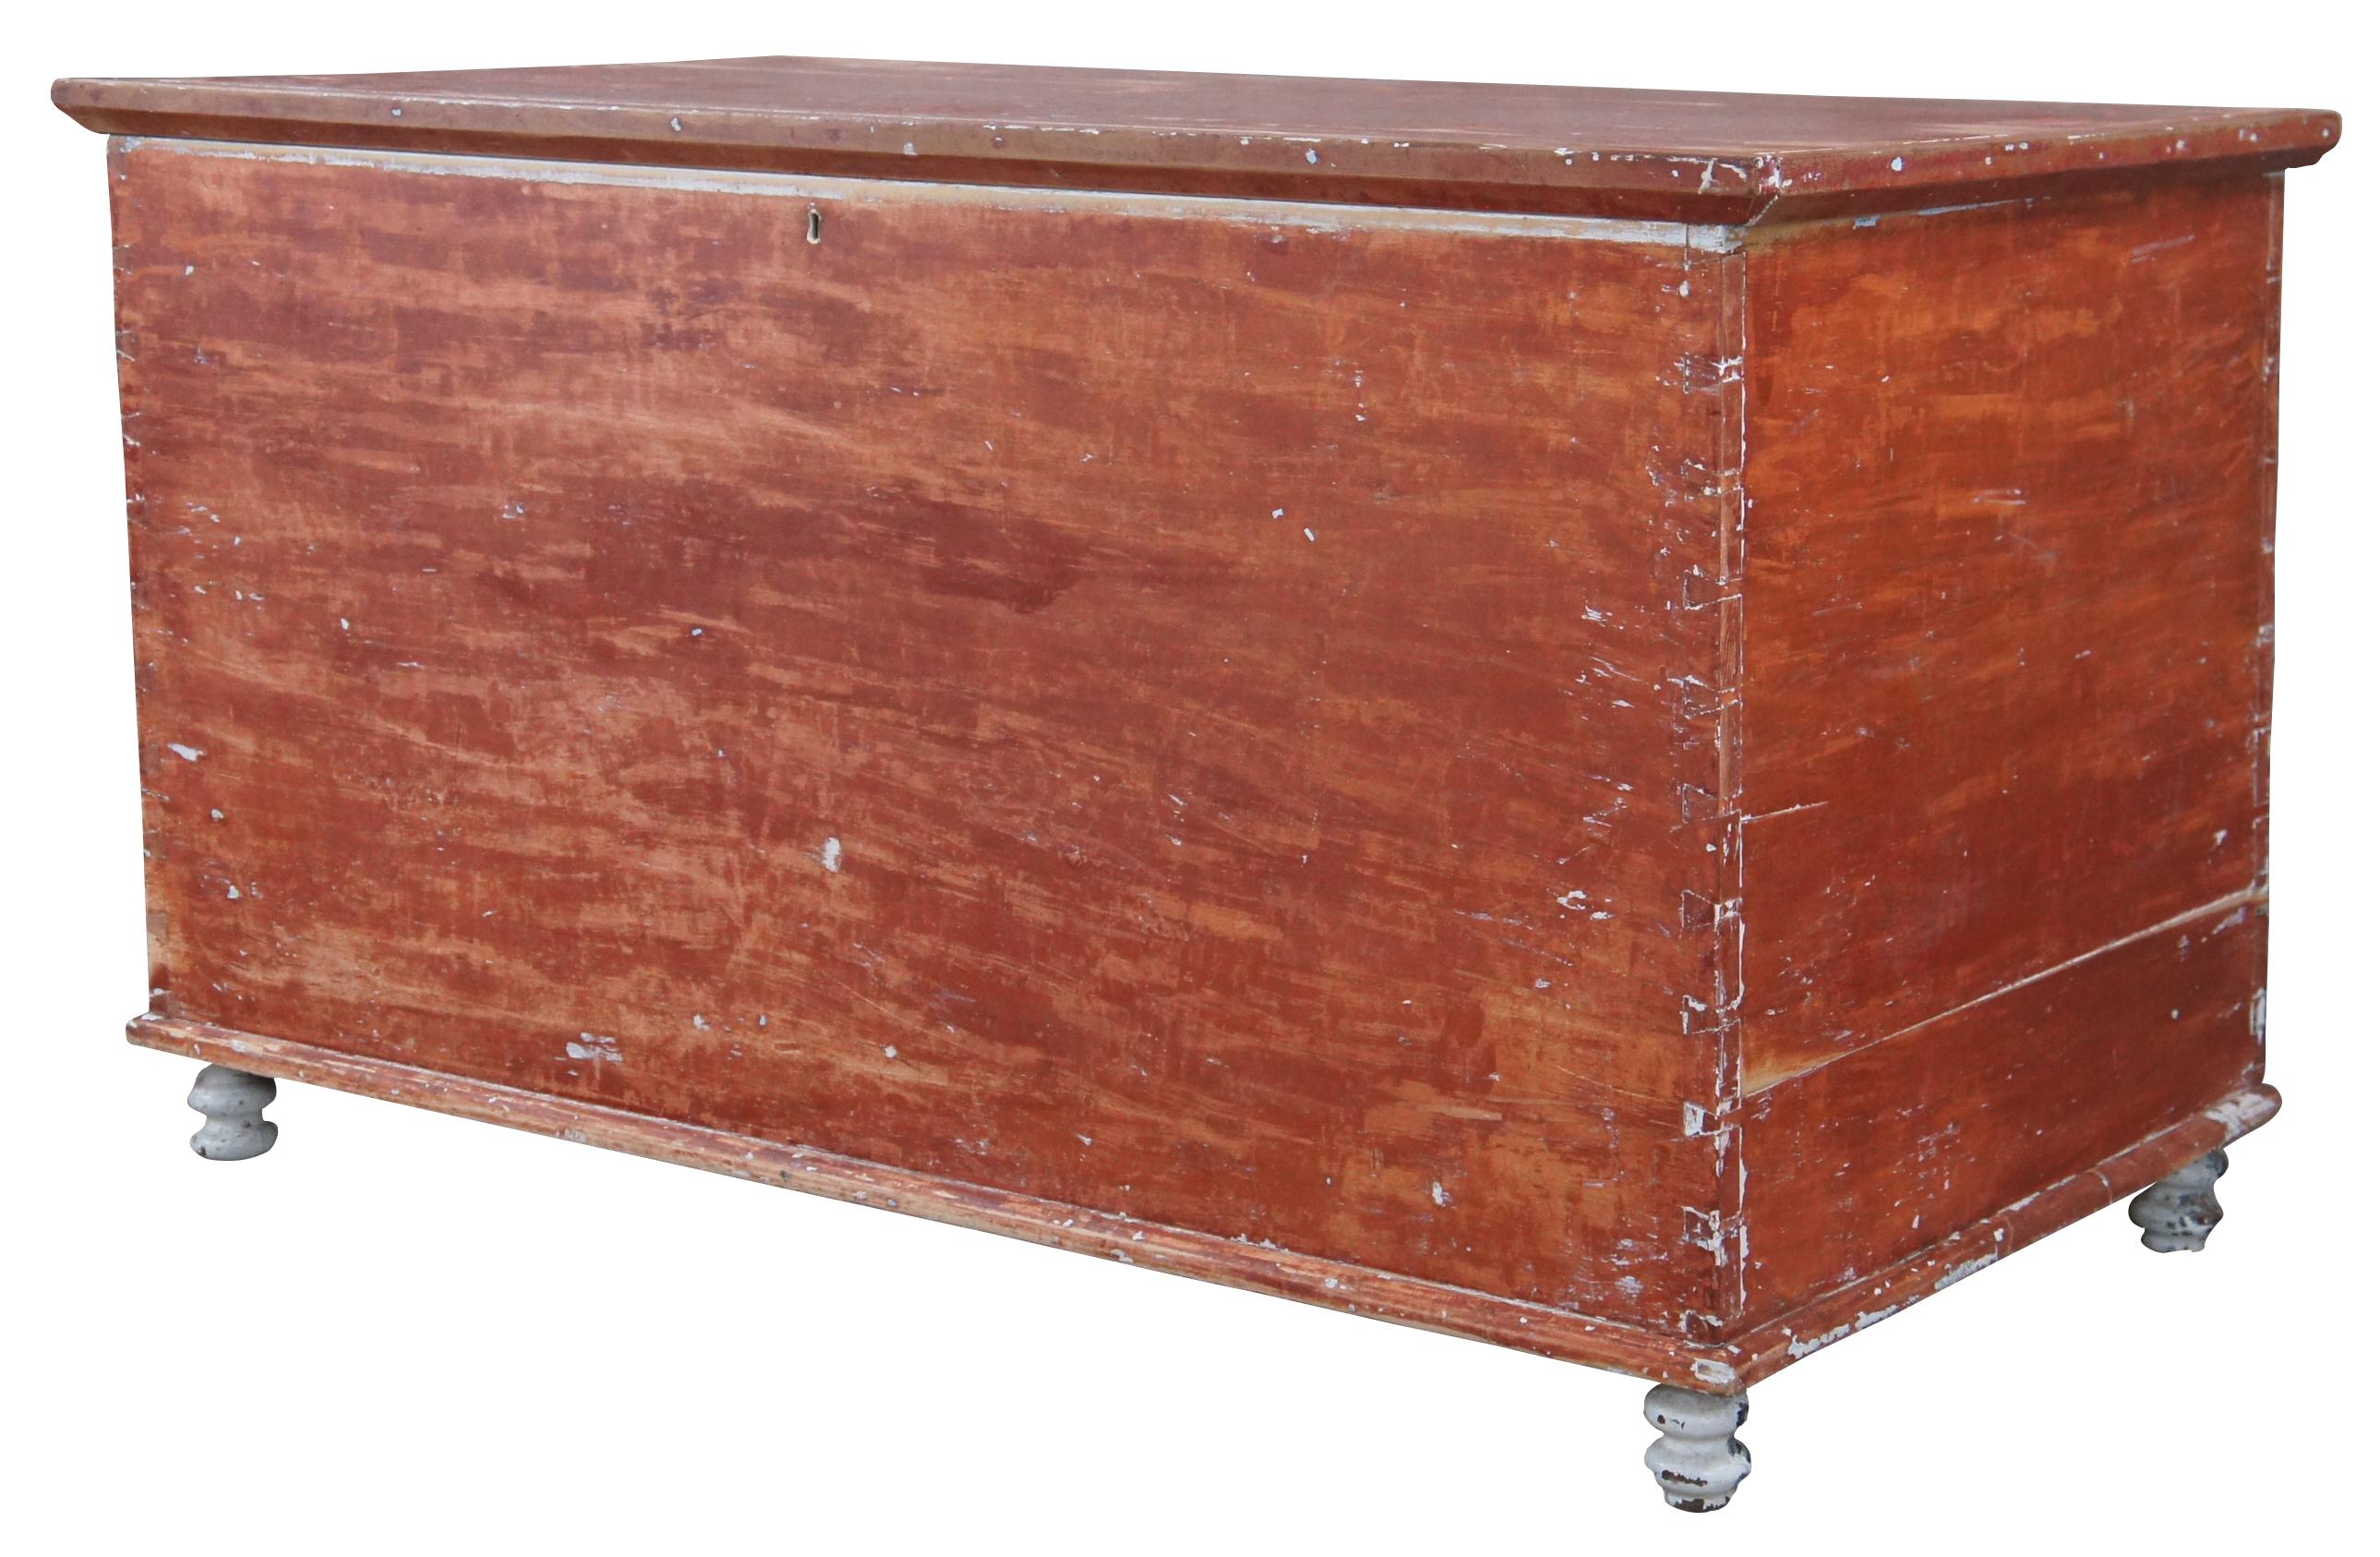 Late 19th century primitive pine farmhouse blanket / hope chest or storage trunk. Made of pine featuring rectangular form painted exterior, hand dovetailing and one interior compartment. Size: 43